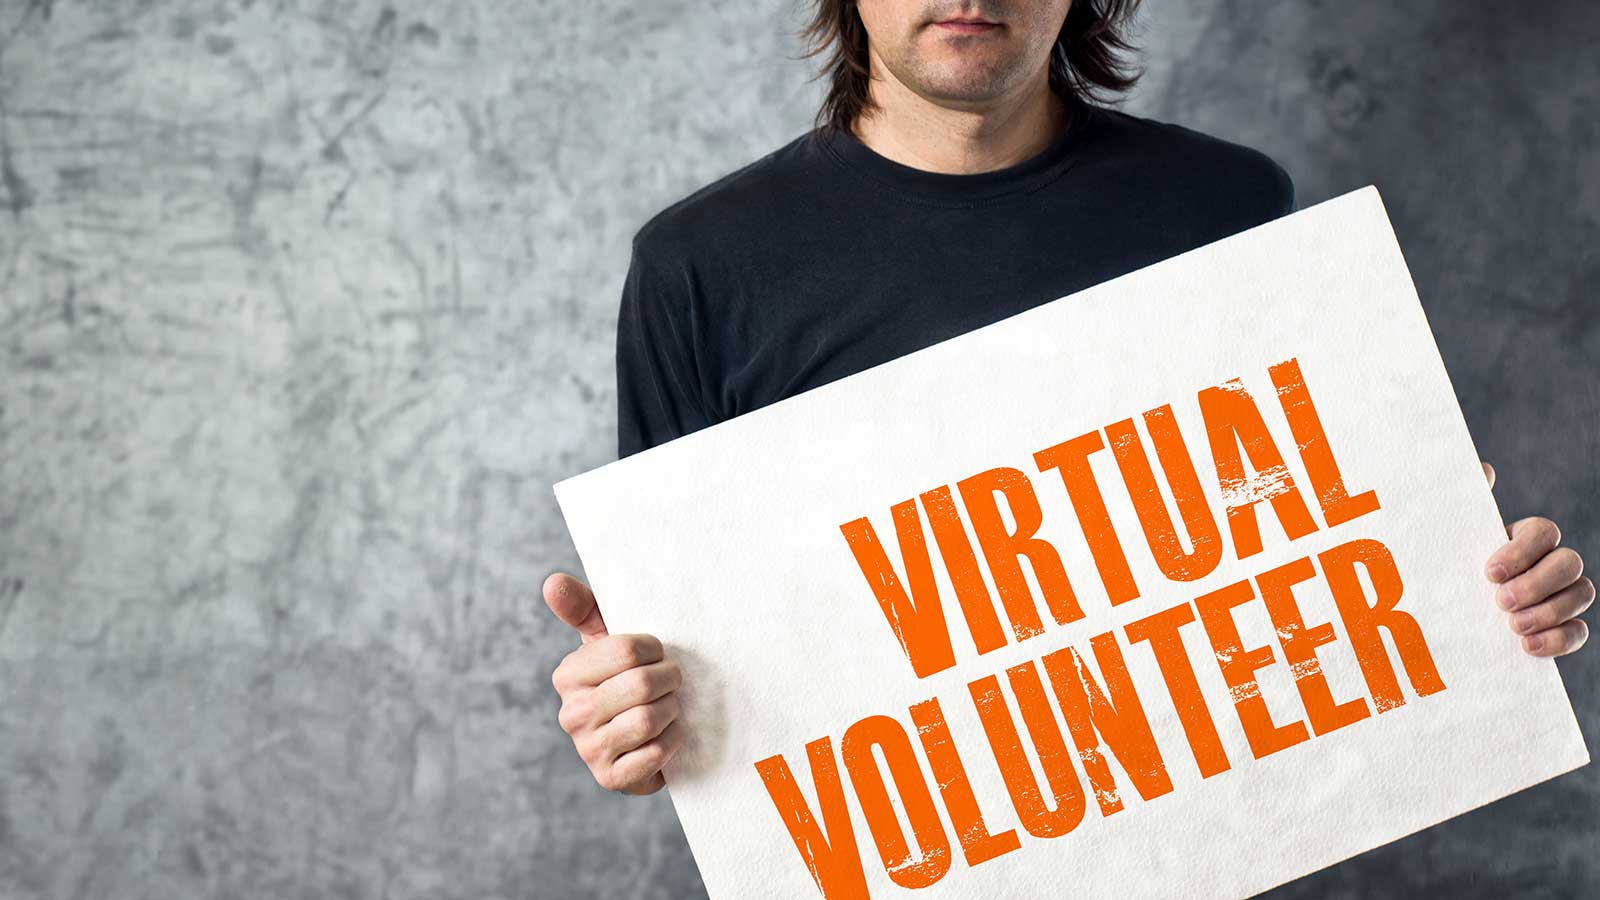 Virtual Volunteering is Having Its Moment - 5 Reasons to Act Now - Revere Software photo